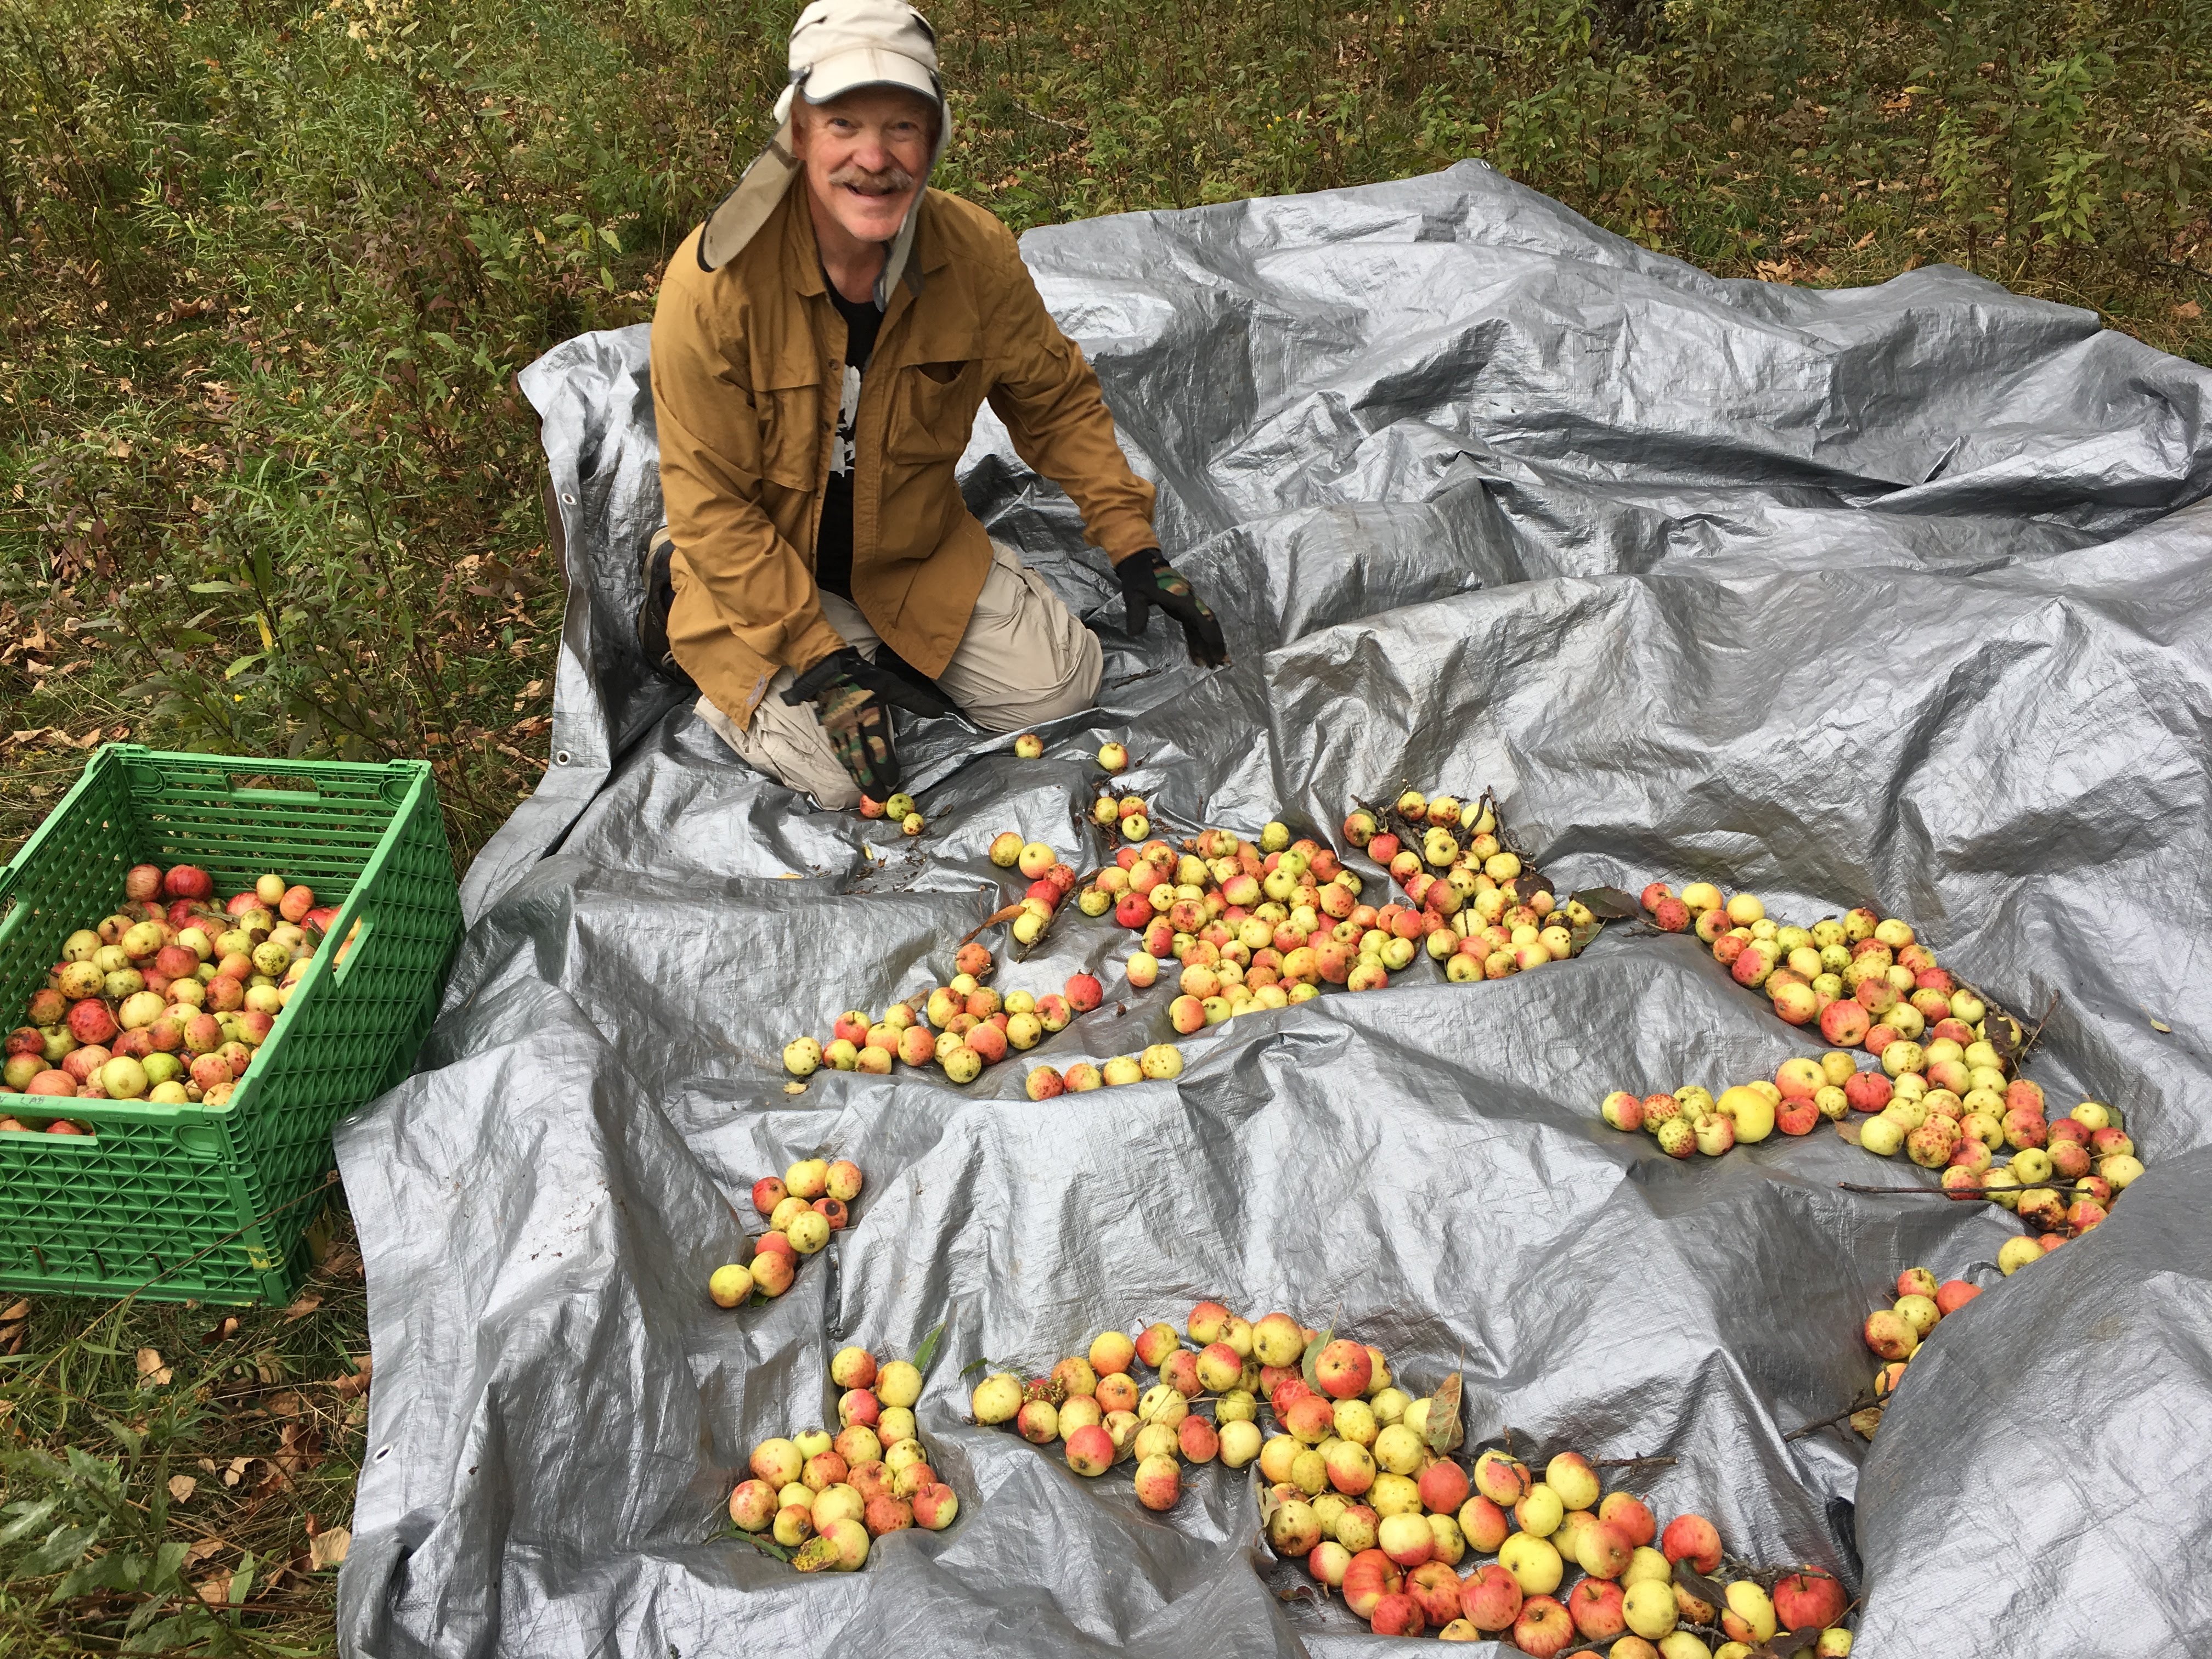 Picture of a man kneeling on the ground, there is a tarp under him. He is surrounded by apples.